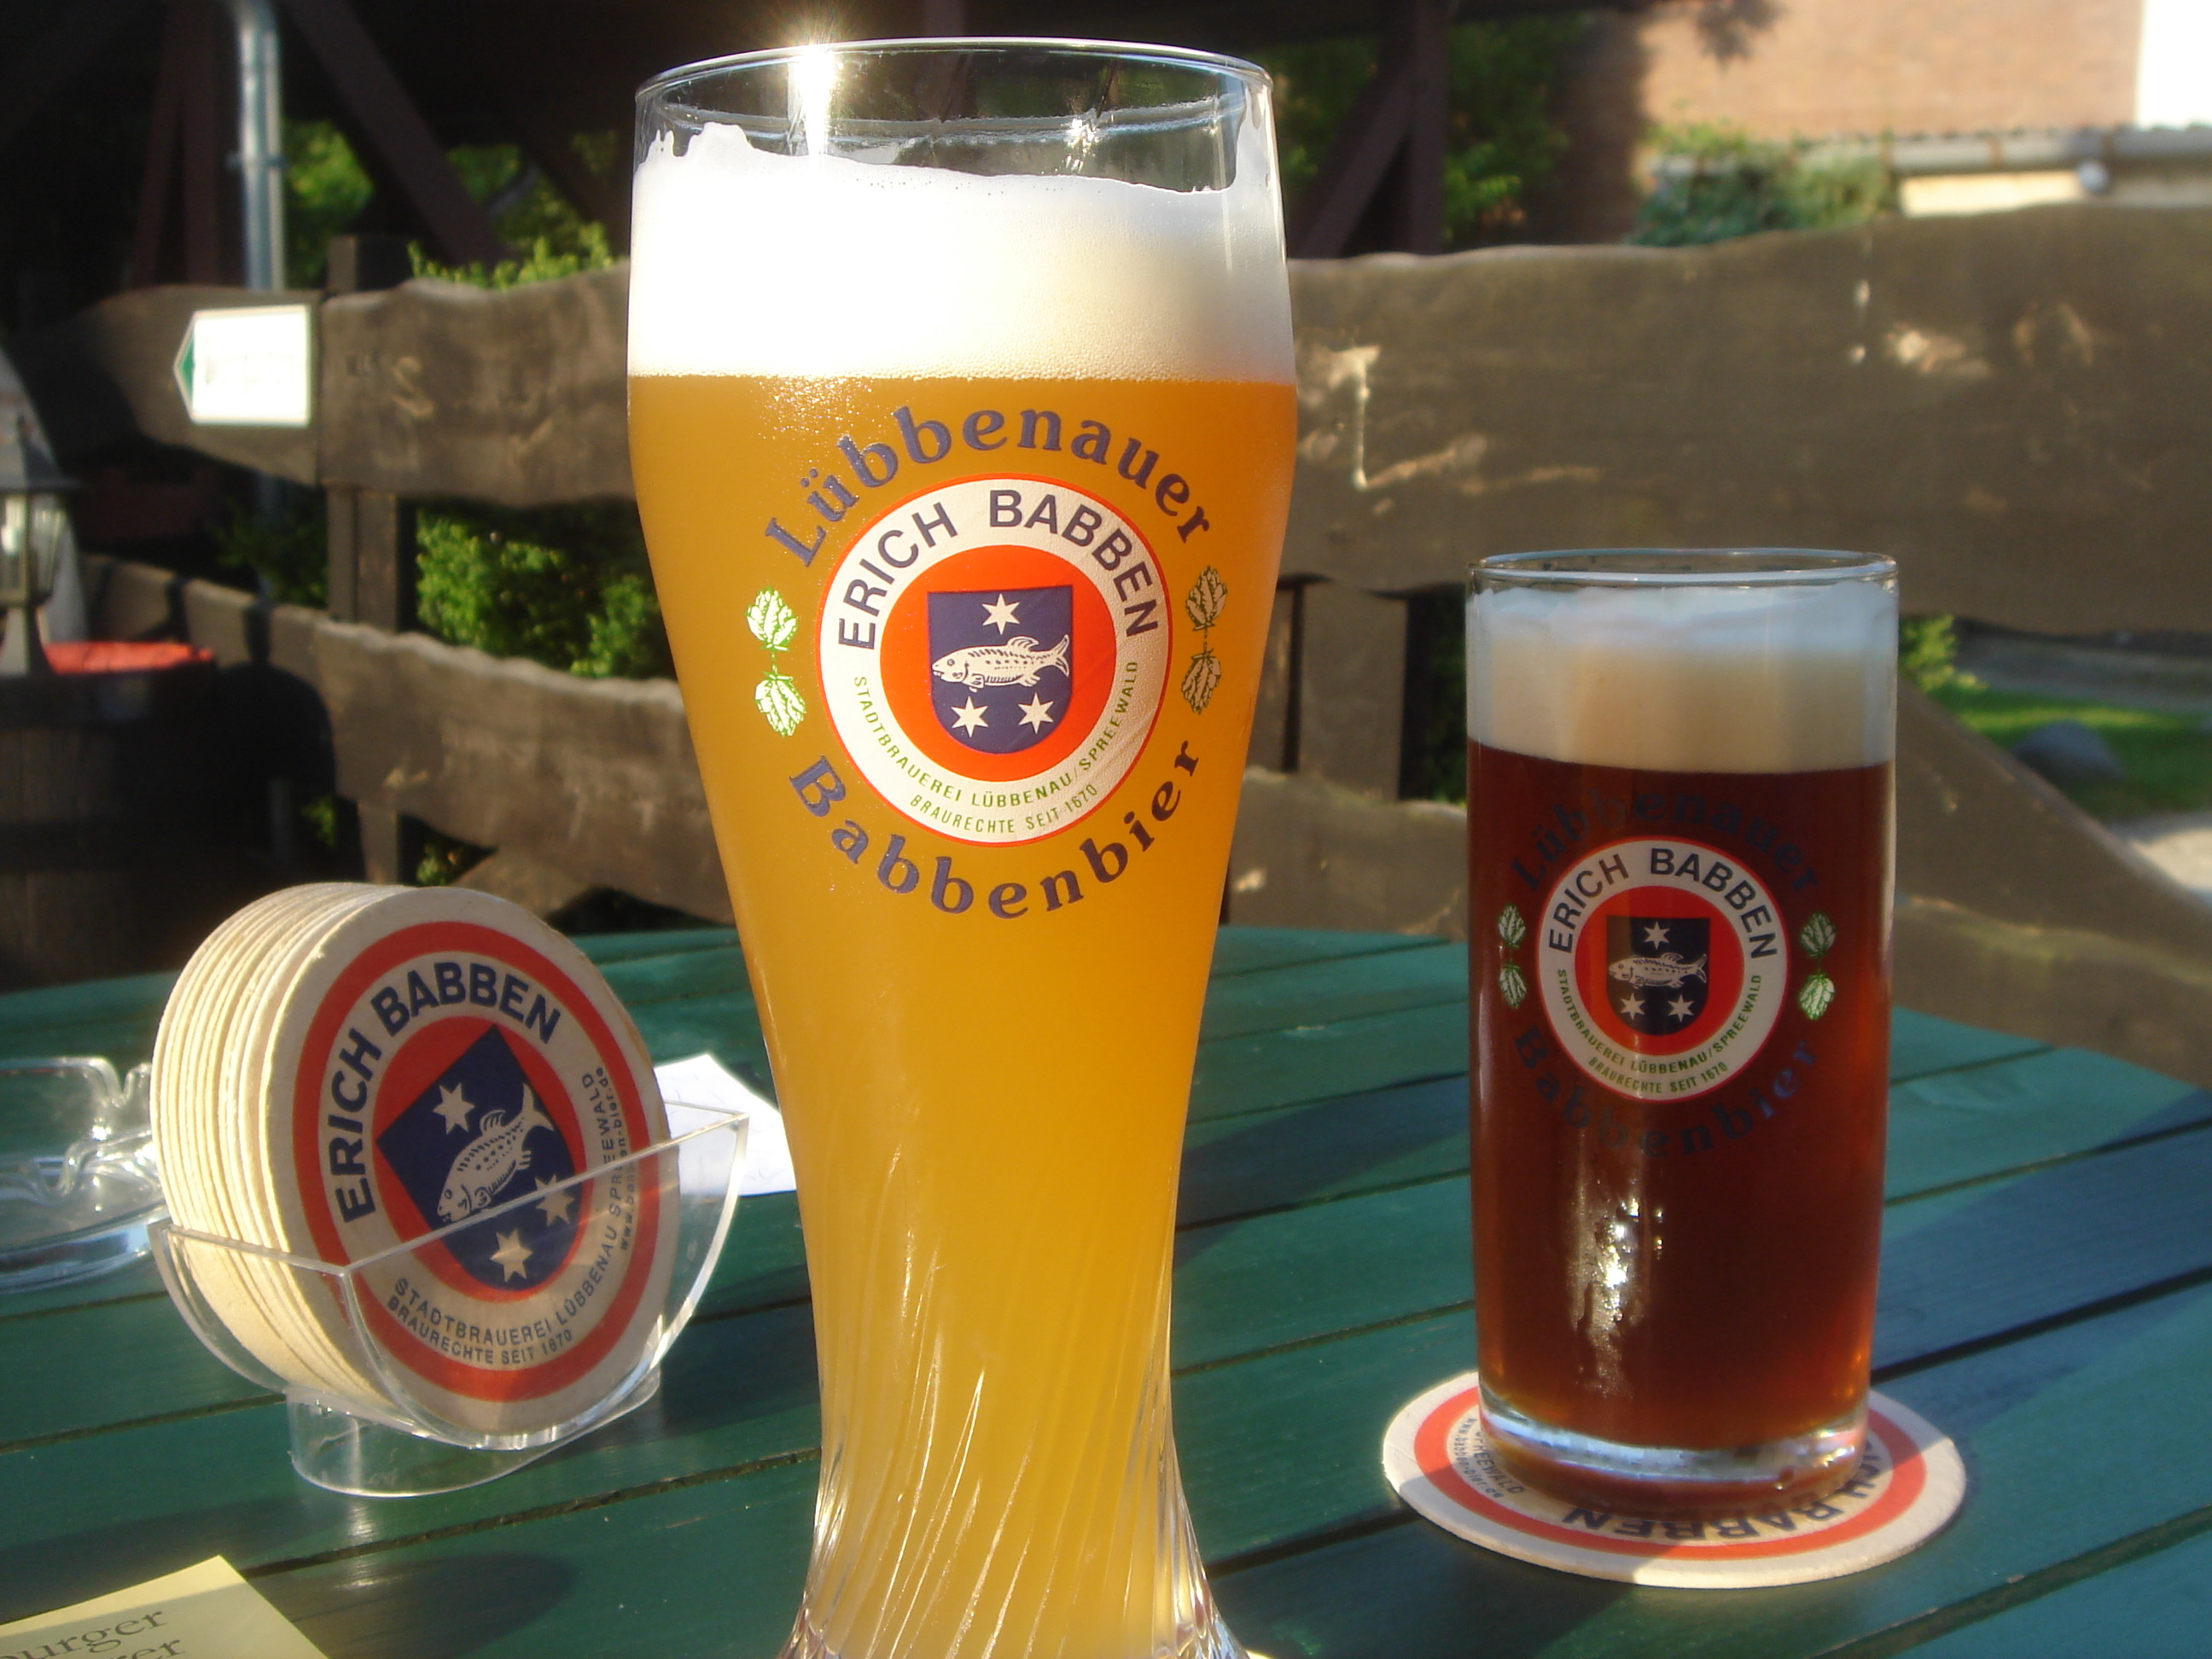 Some beer at a small brewery in Spreewald, where chickens roam freely beneath the tables